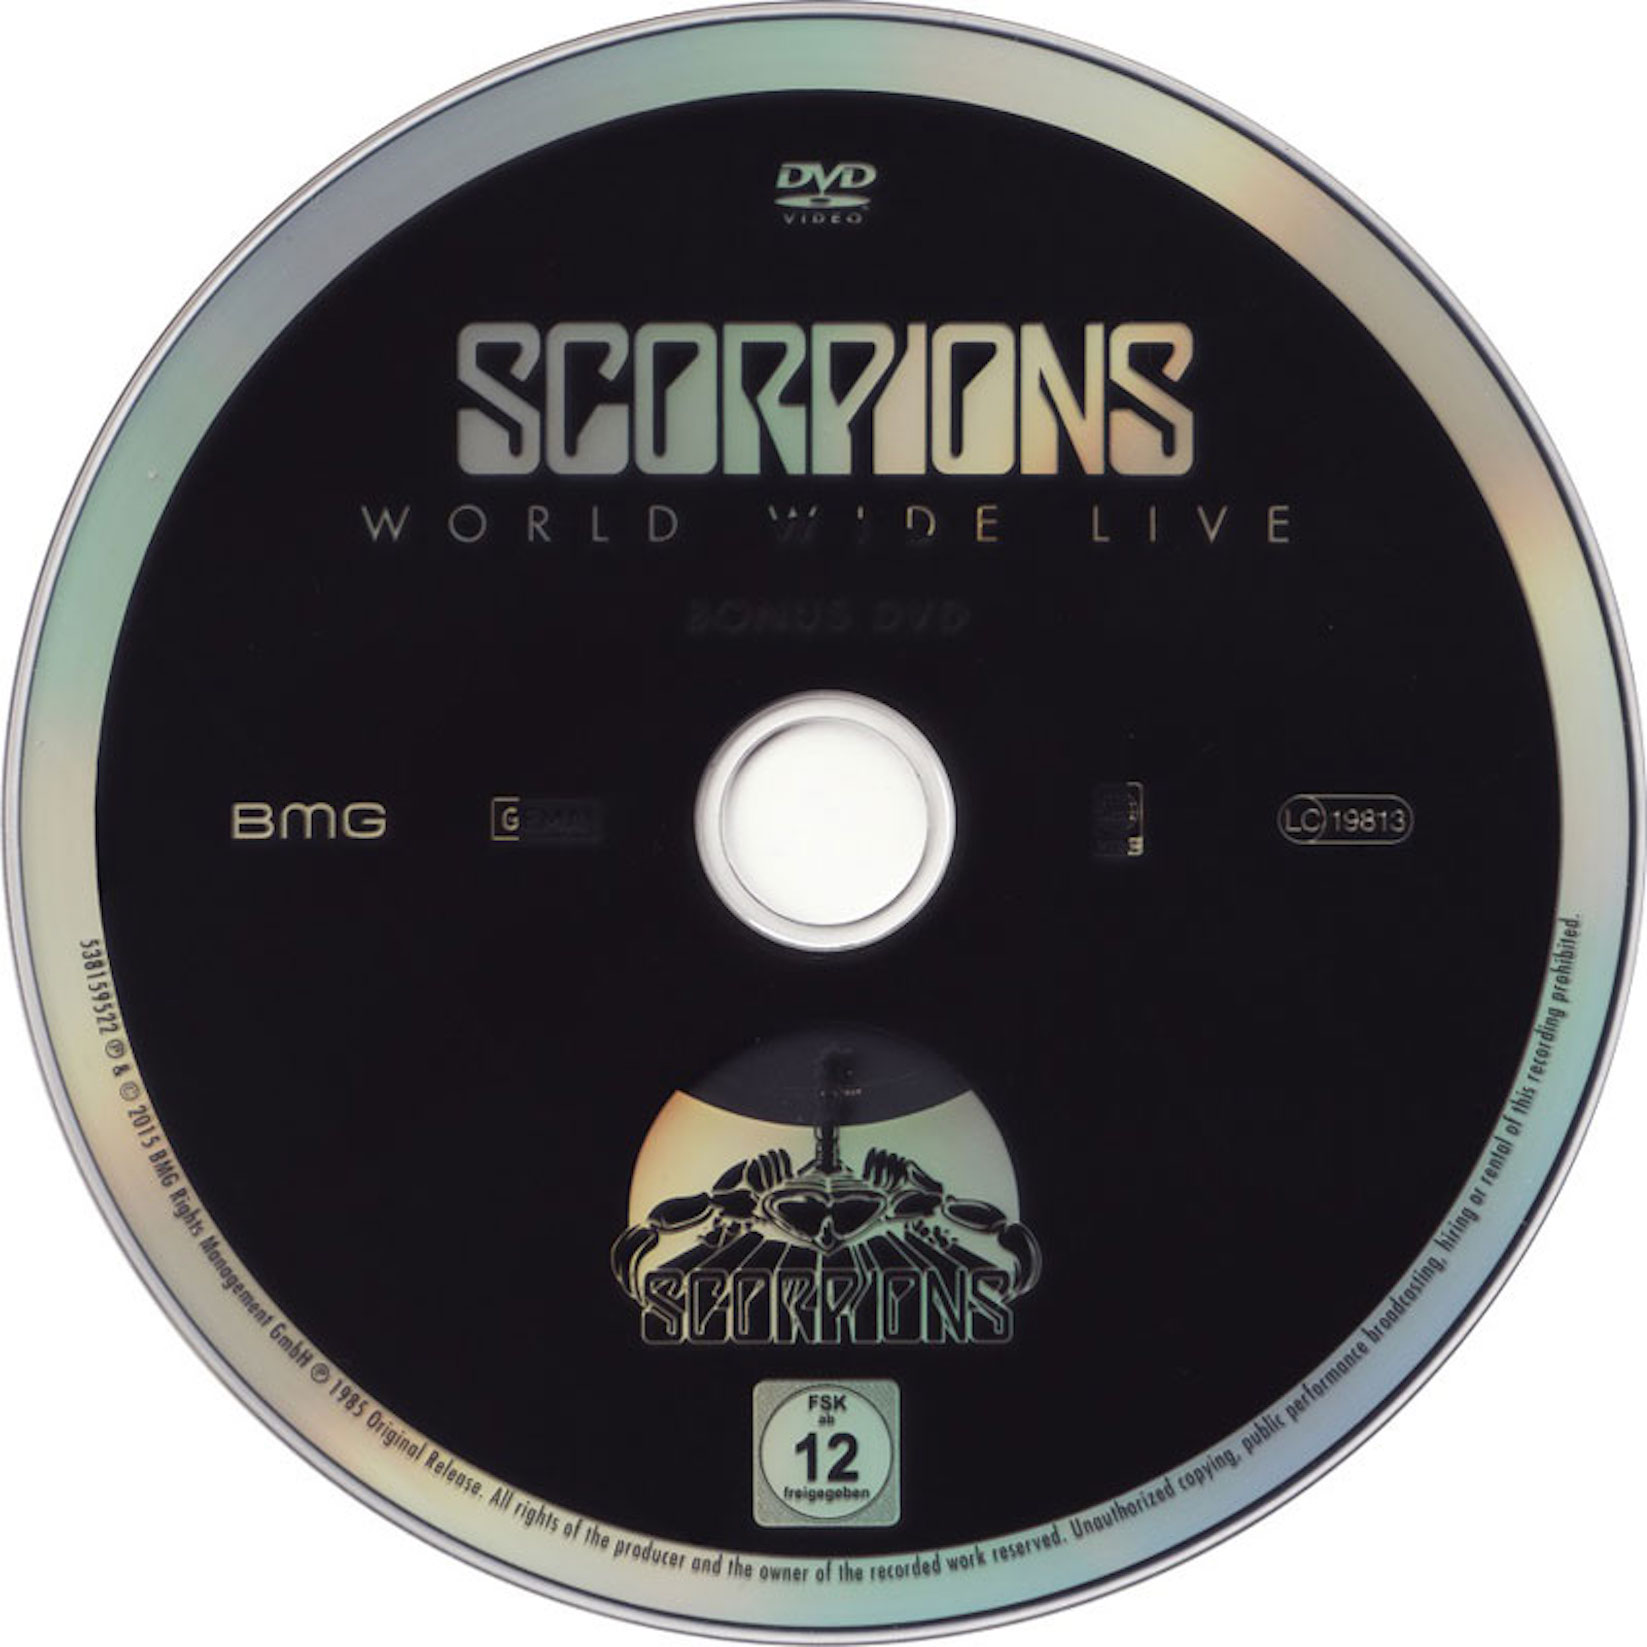 First sting. Scorpions World wide Live 1985. Скорпионс 1982 Blackout. Scorpions "World wide Live". Scorpions 1984 CD.